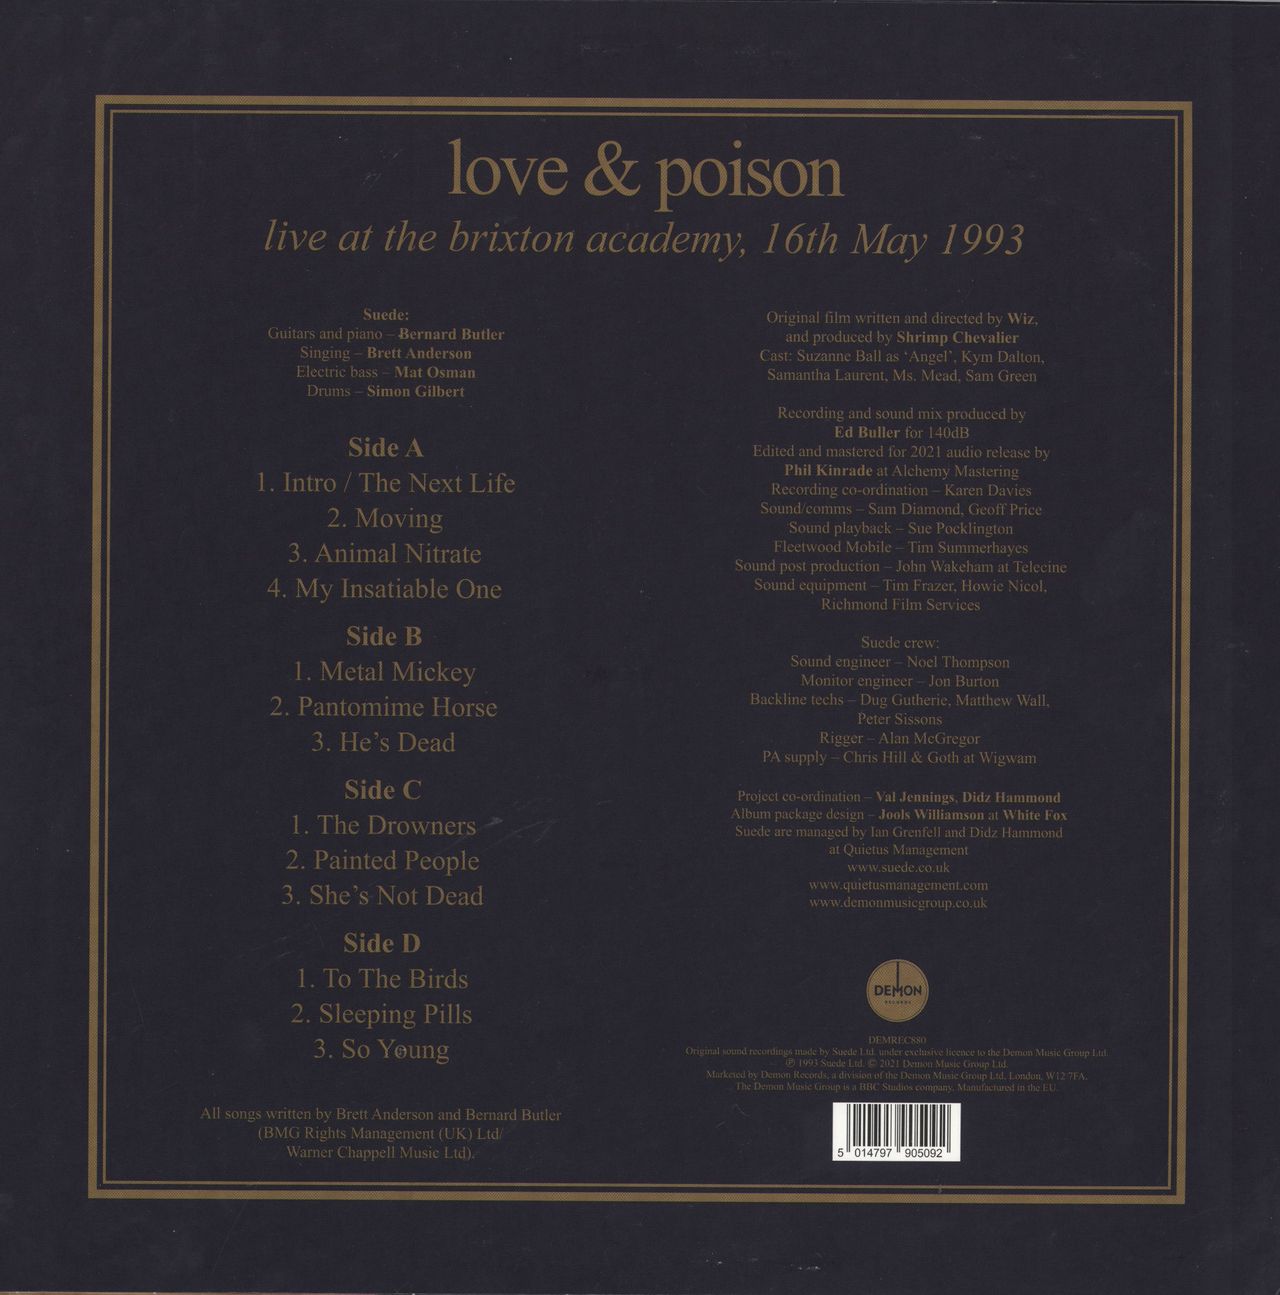 Suede Love & Poison (Live At The Brixton Academy, 16th May 1993) - Clear Vinyl UK 2-LP vinyl record set (Double LP Album) 5014797905092